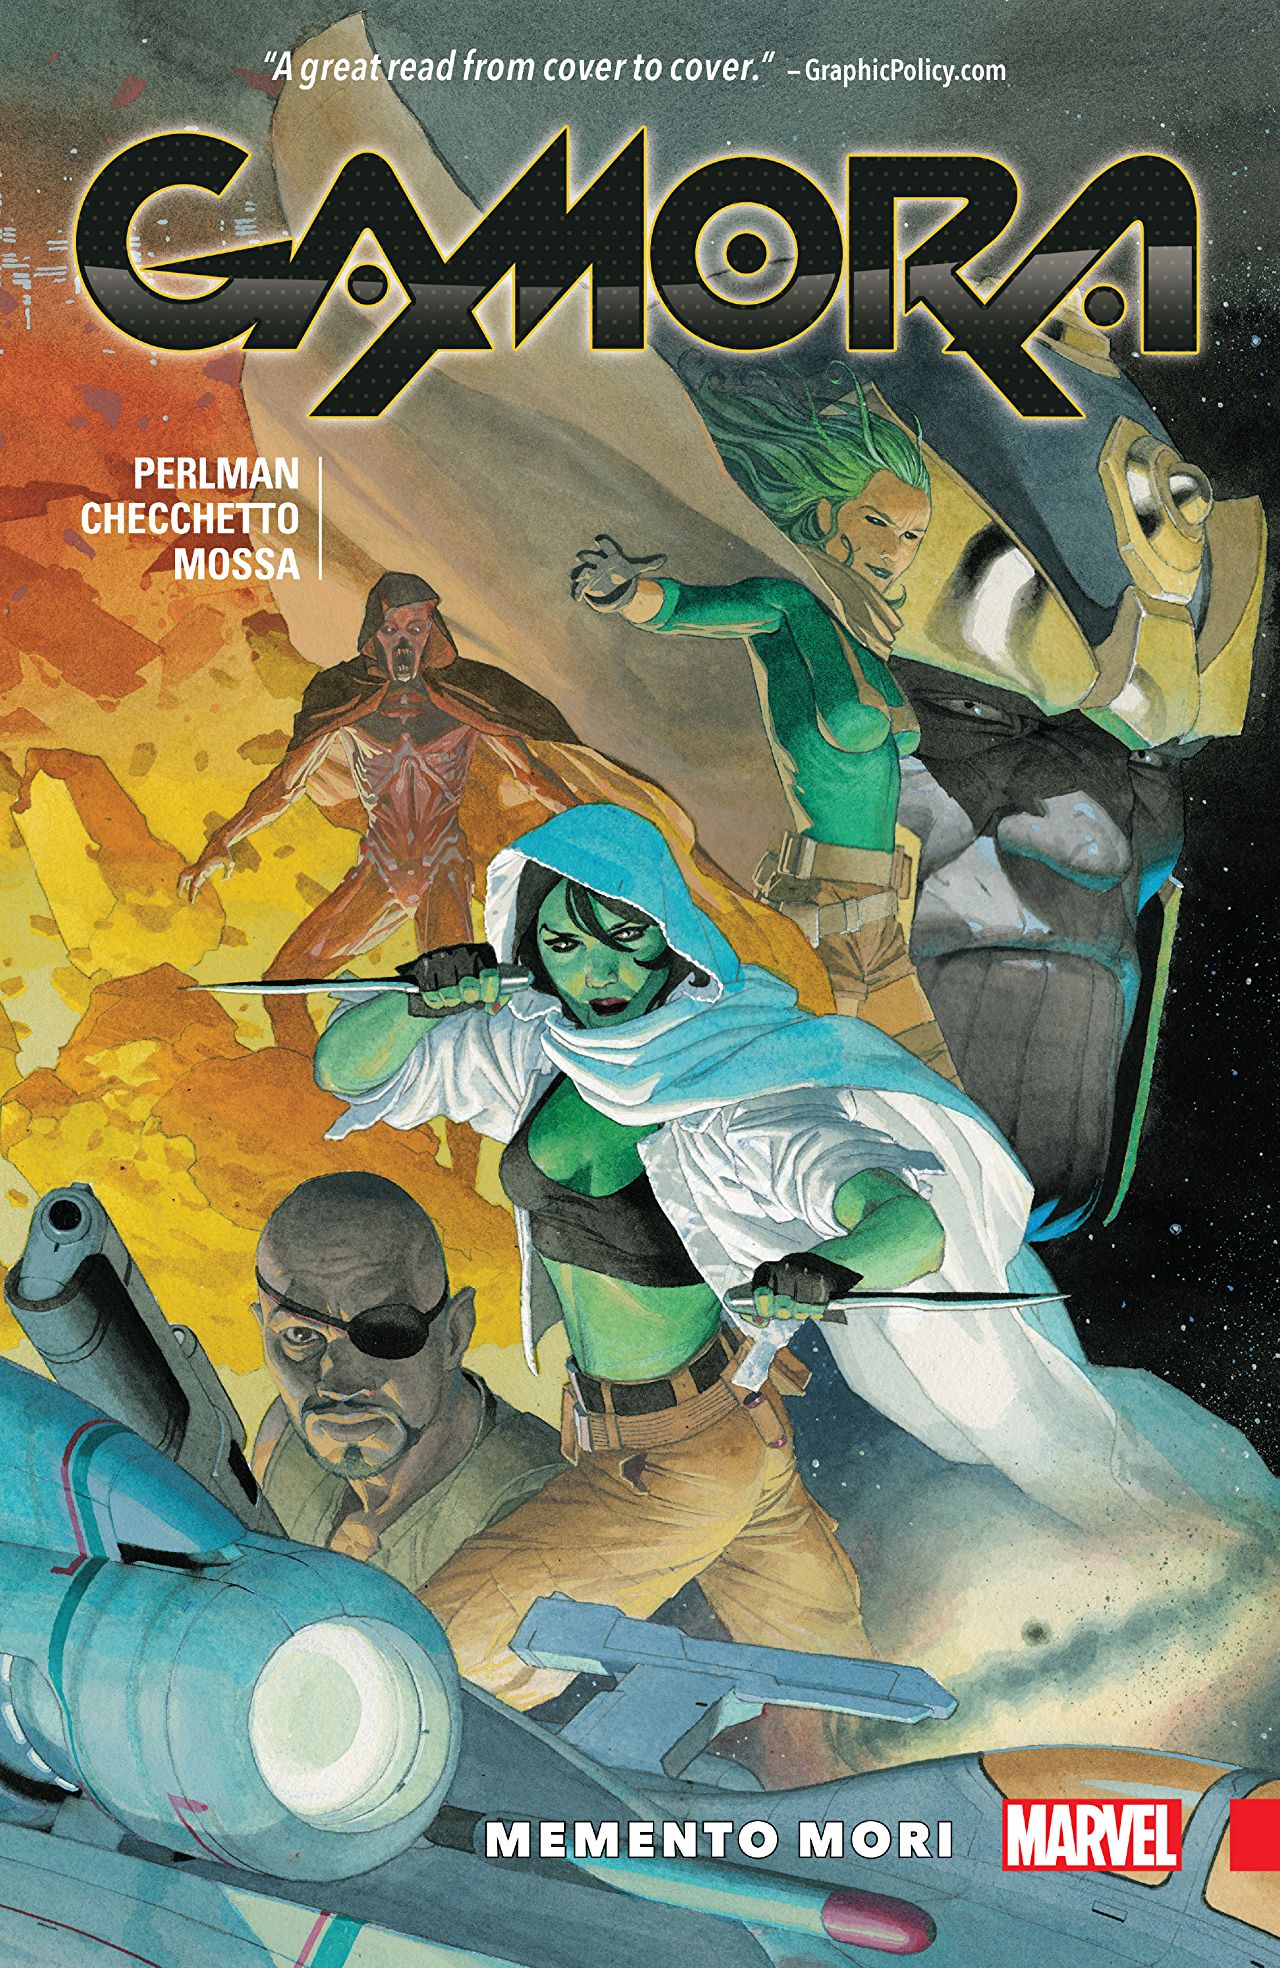 'Gamora: Memento Mori' review: A fun sci-fi book, but the title character plays second fiddle